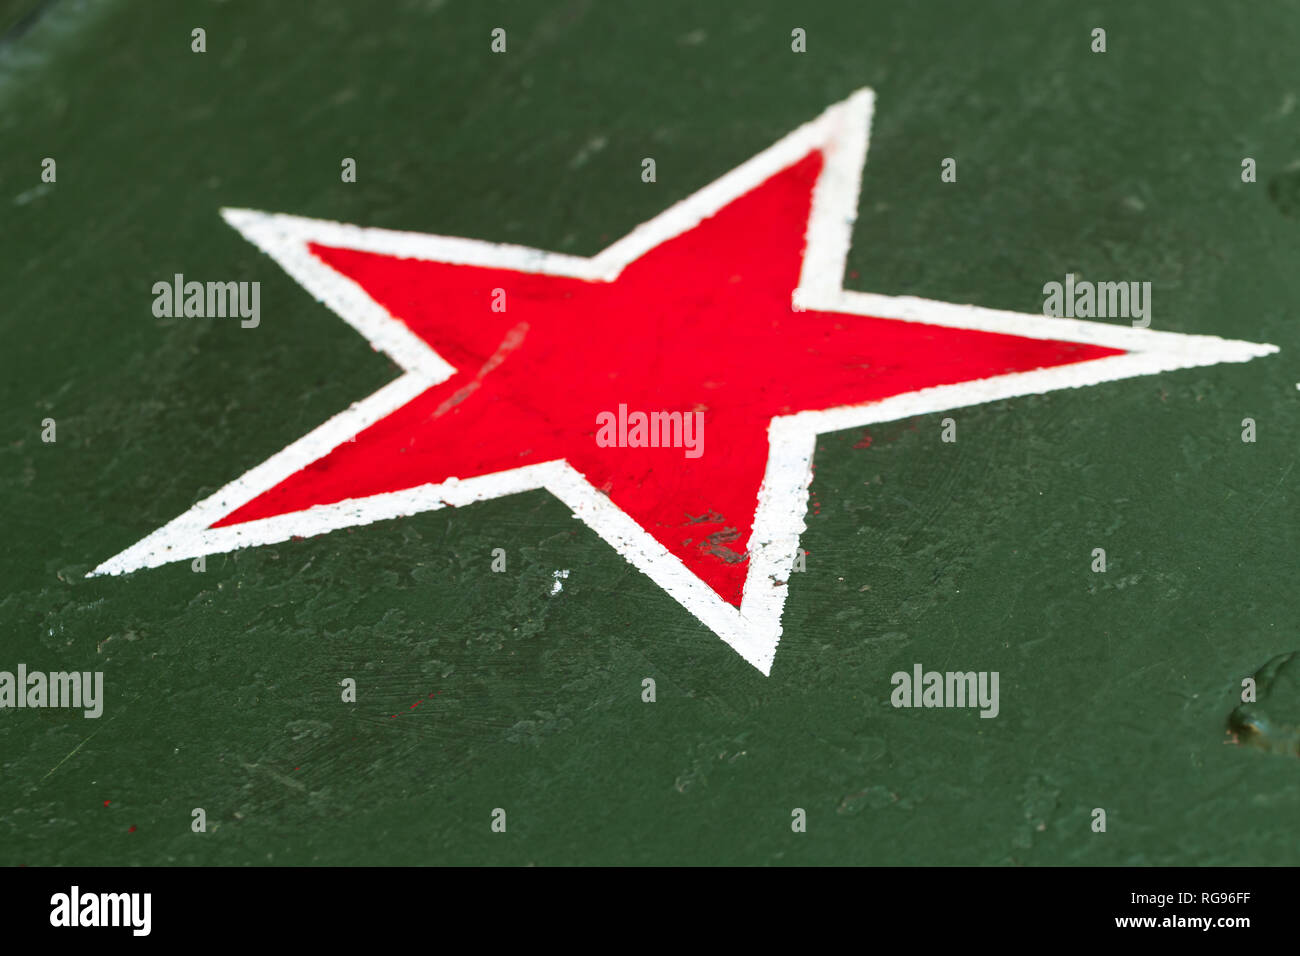 Red star with white border on green steel plate. Sign of Soviet Workers and Peasants Red Army on tank body from World War II period Stock Photo